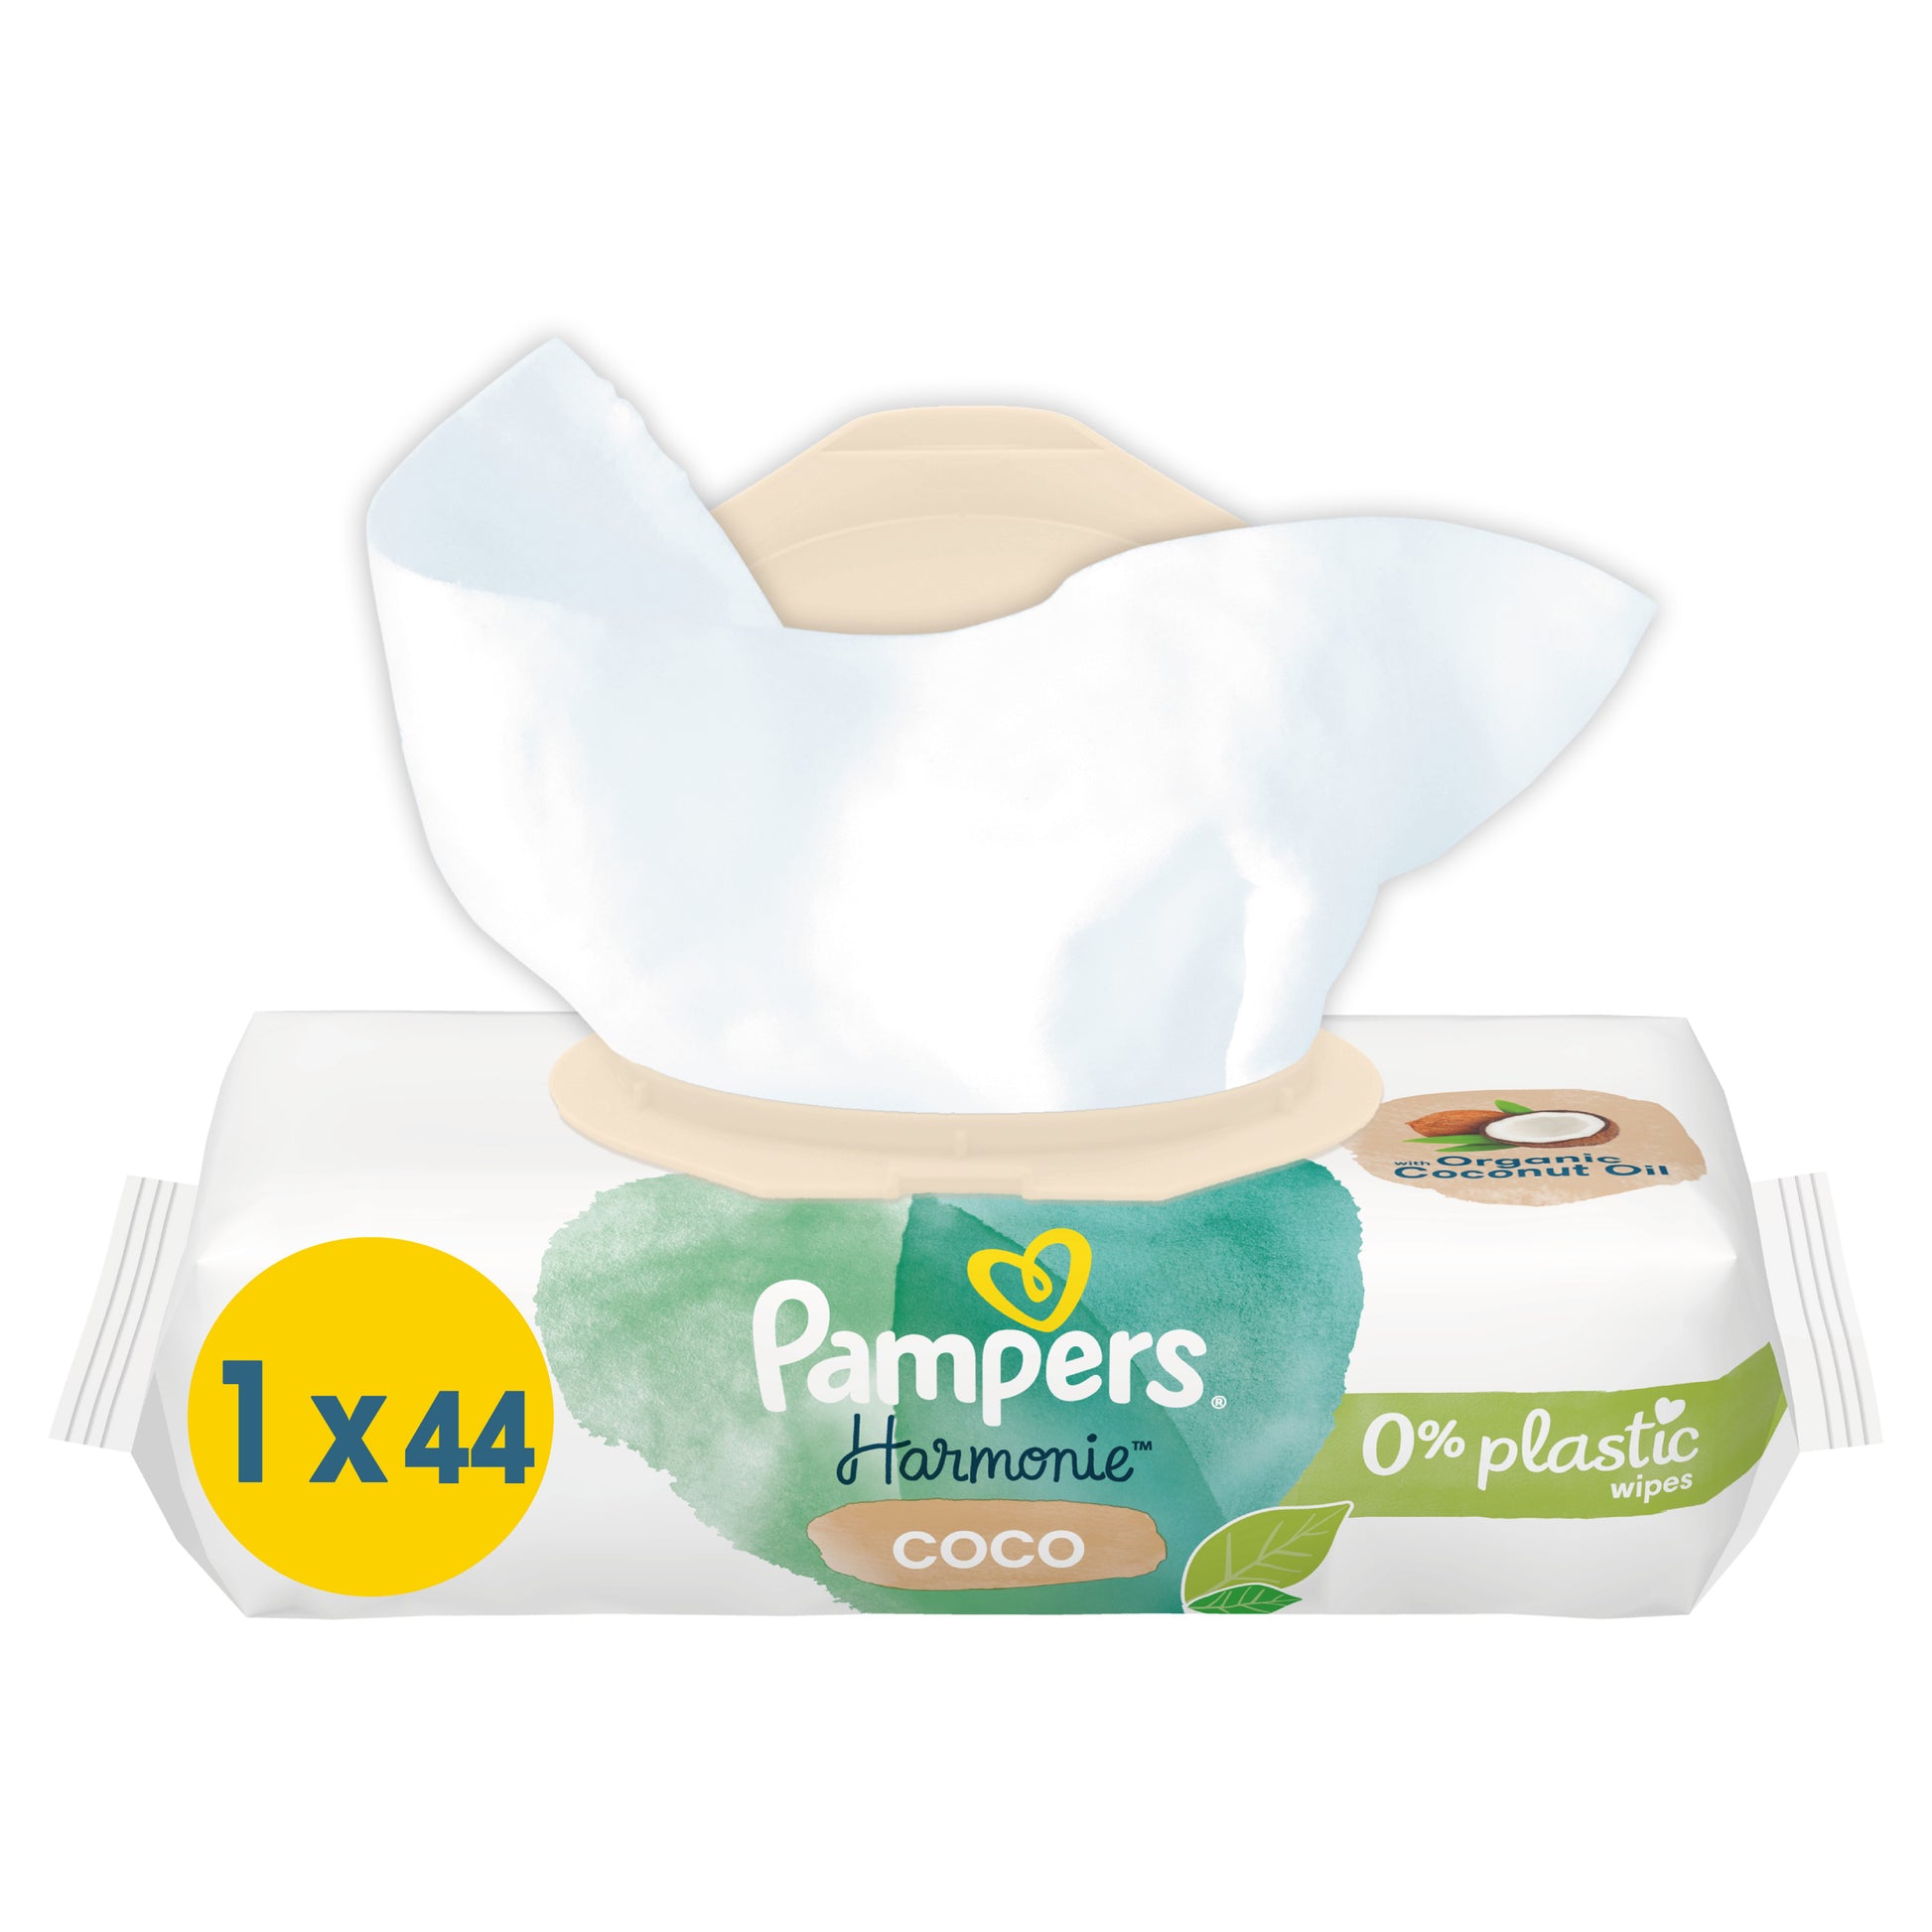 Pampers Harmonie Coco Lingettes (42 pces)